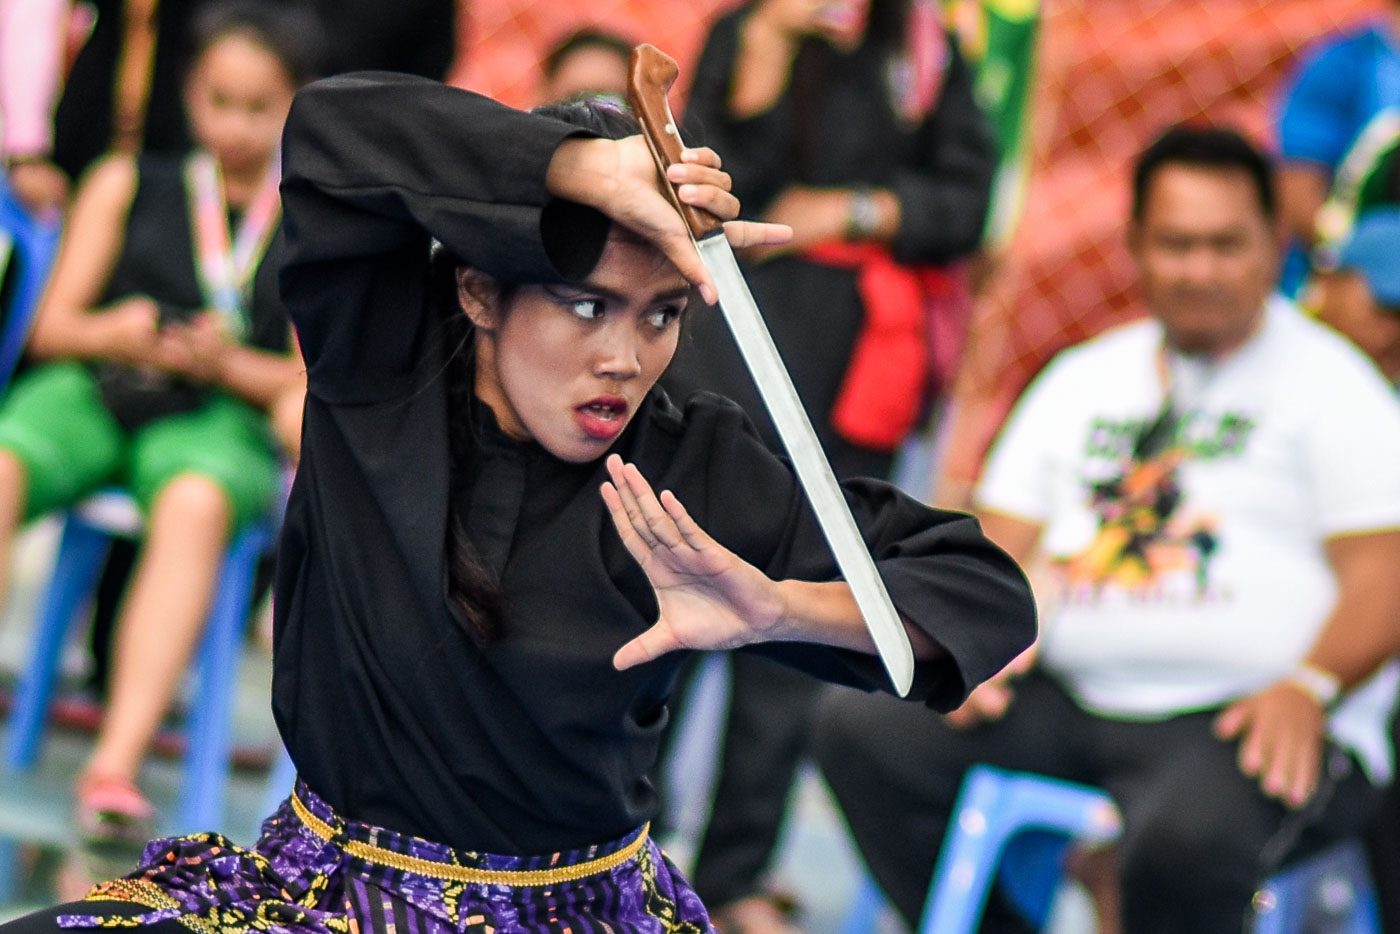 FIERCE. A Pencak Silat competitor from Iloilo shows her game face during the event at the EBJ Sports Stadium in San Jose. Photo by LeAnne Jazul/Rappler  